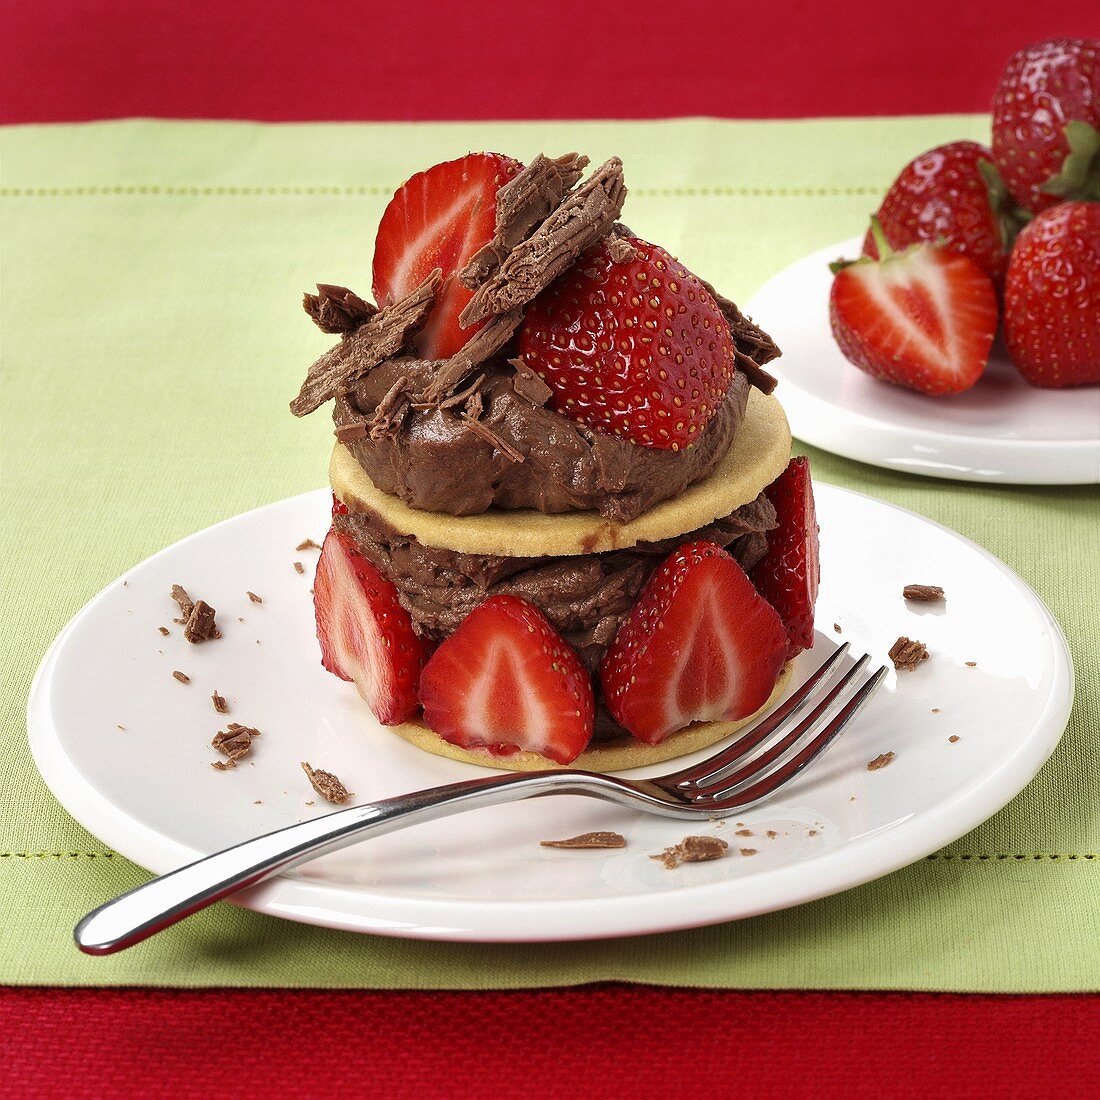 Chocolate fancy with fresh strawberries